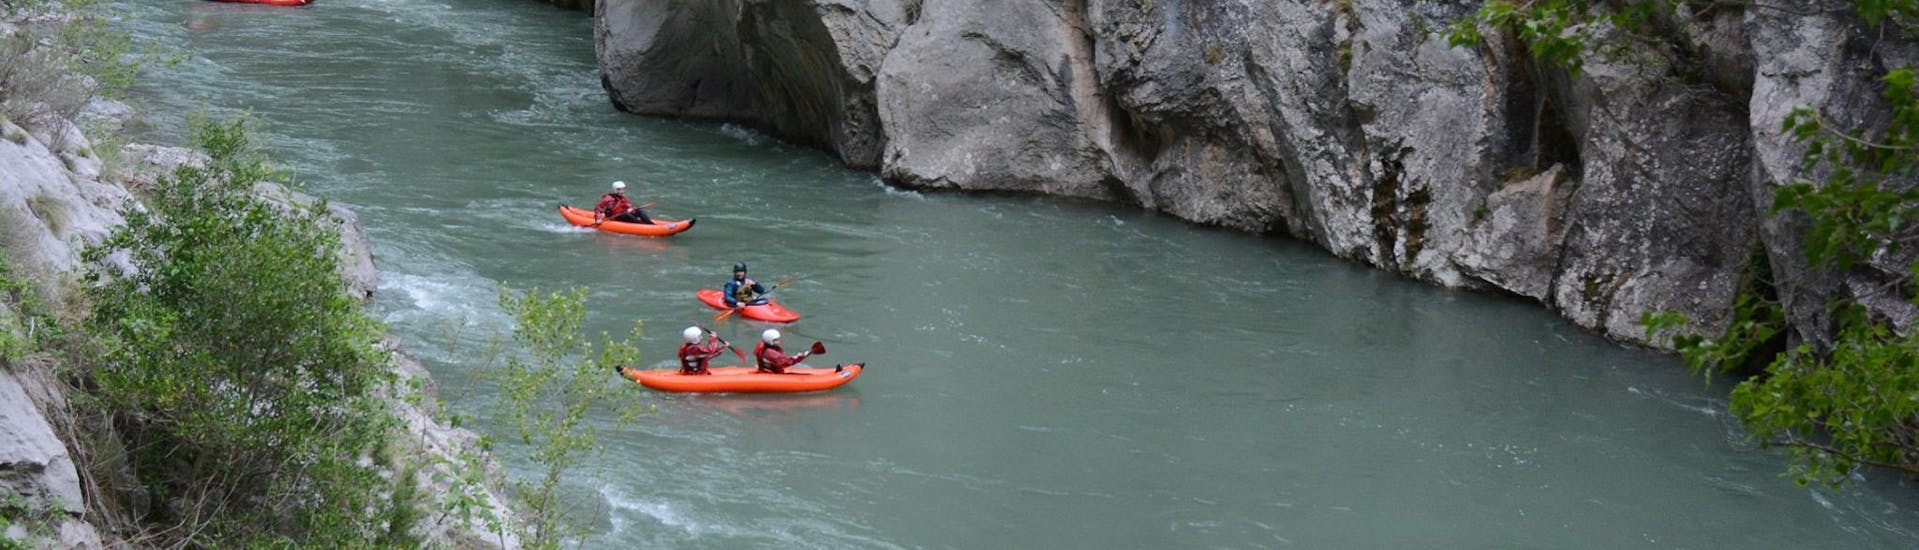 A group of people is paddling on the Noguera Pallaresa while on their canoraft tour with La Rafting Company.